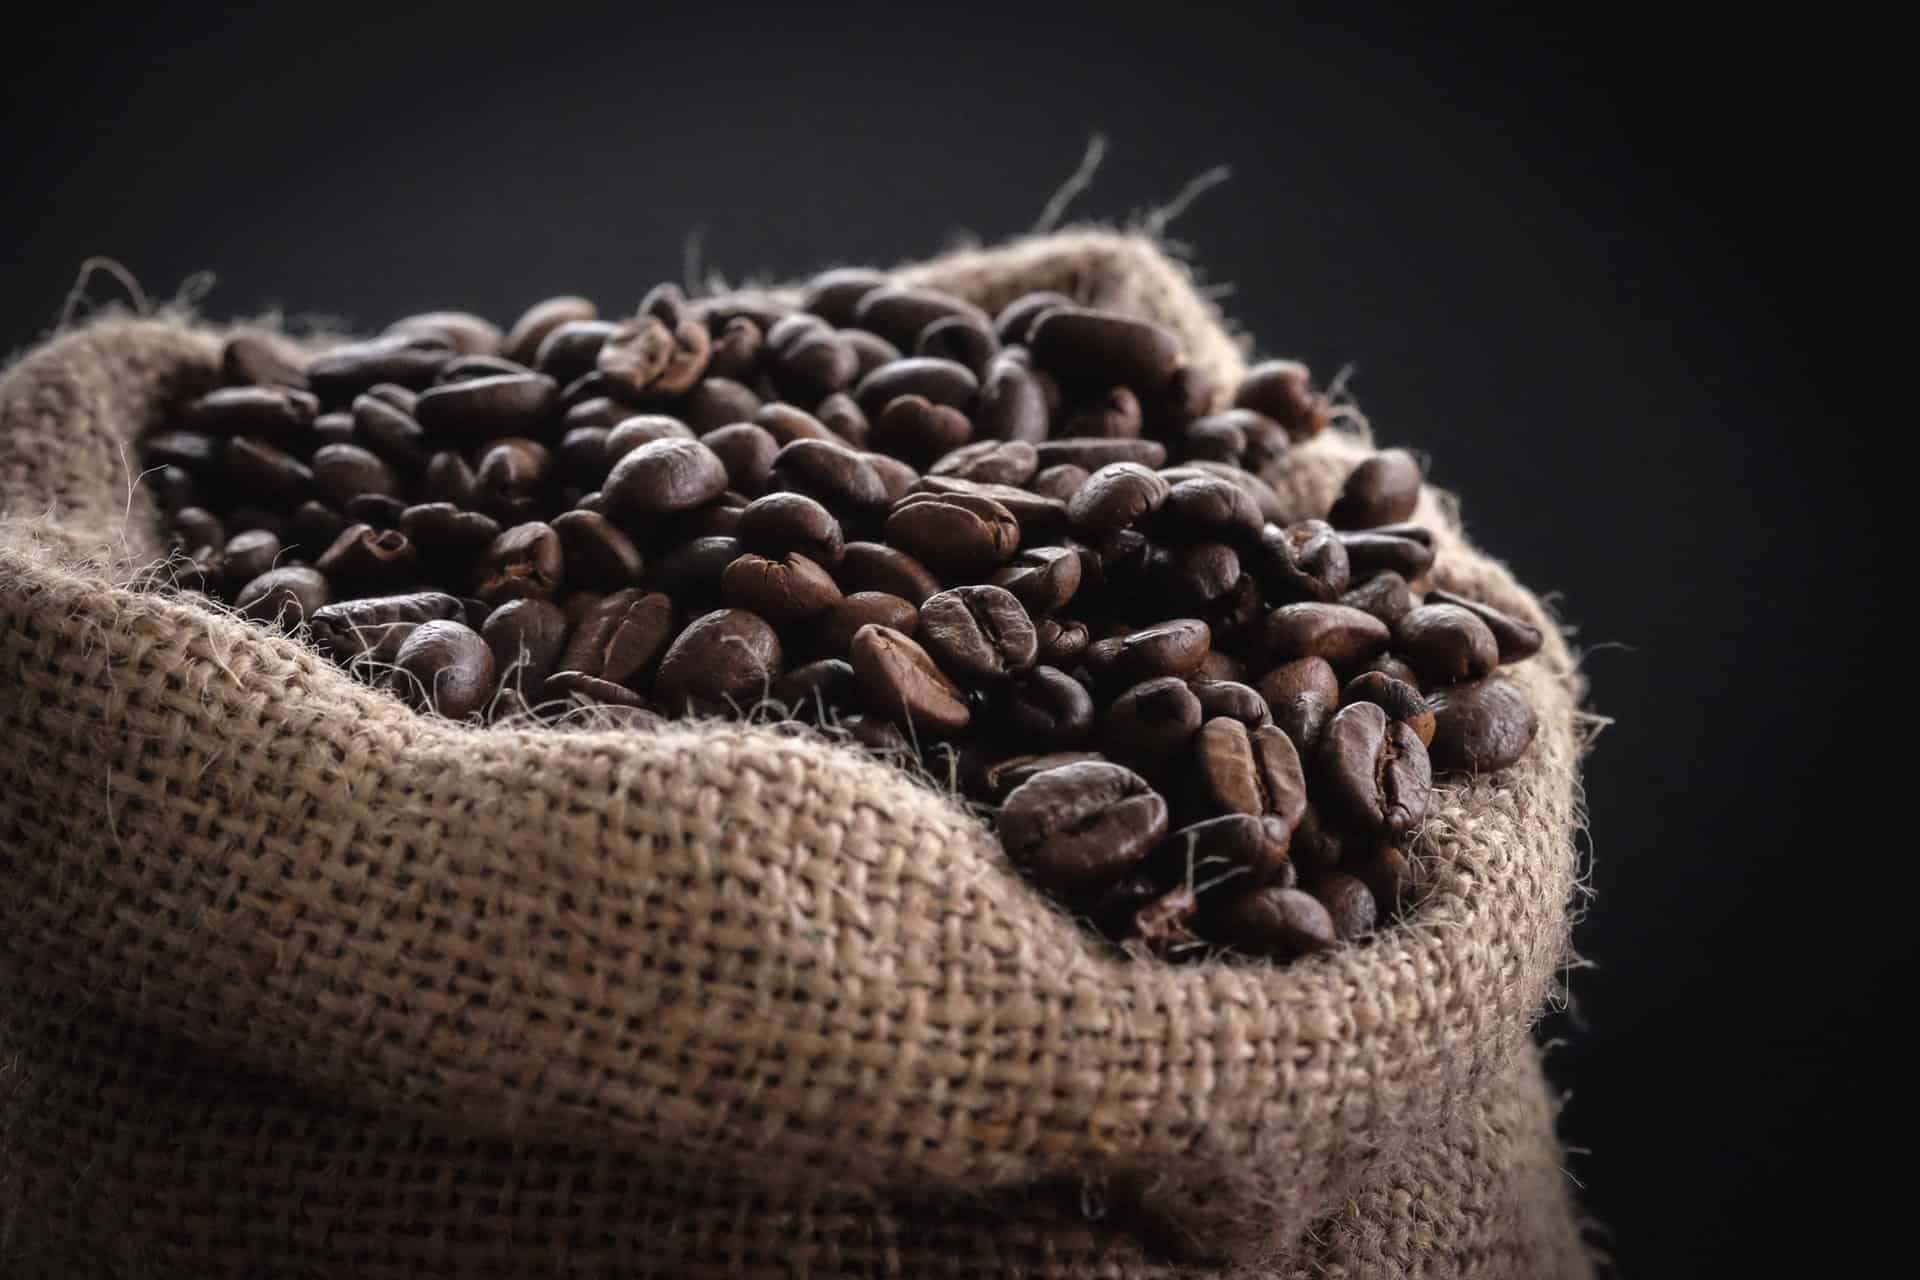 Are you a coffee drinker? Meet the world’s most expensive coffees